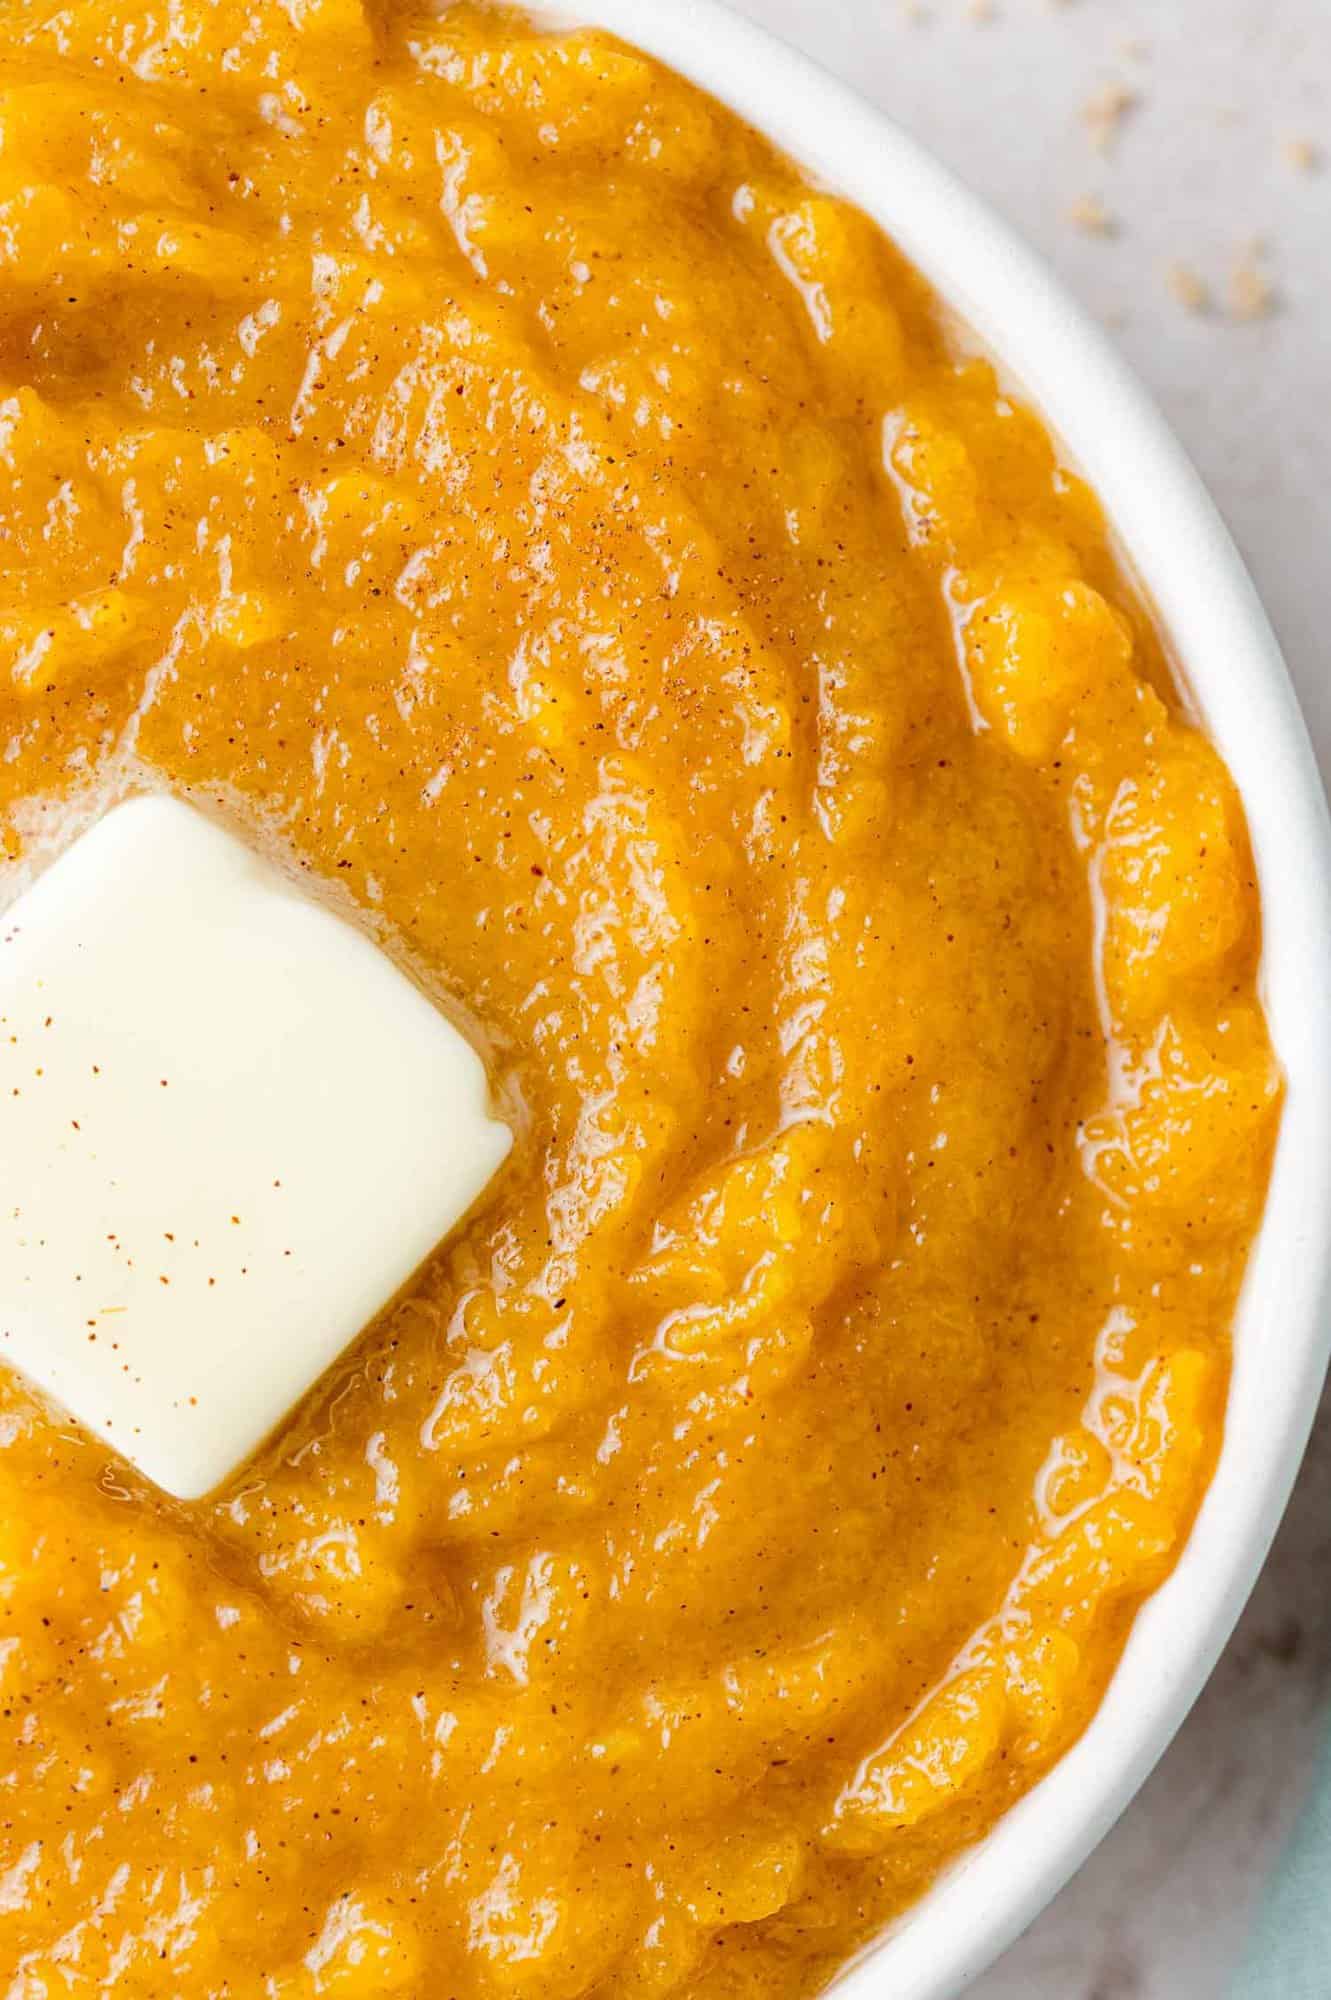 Butter melting on a bowl of mashed squash.